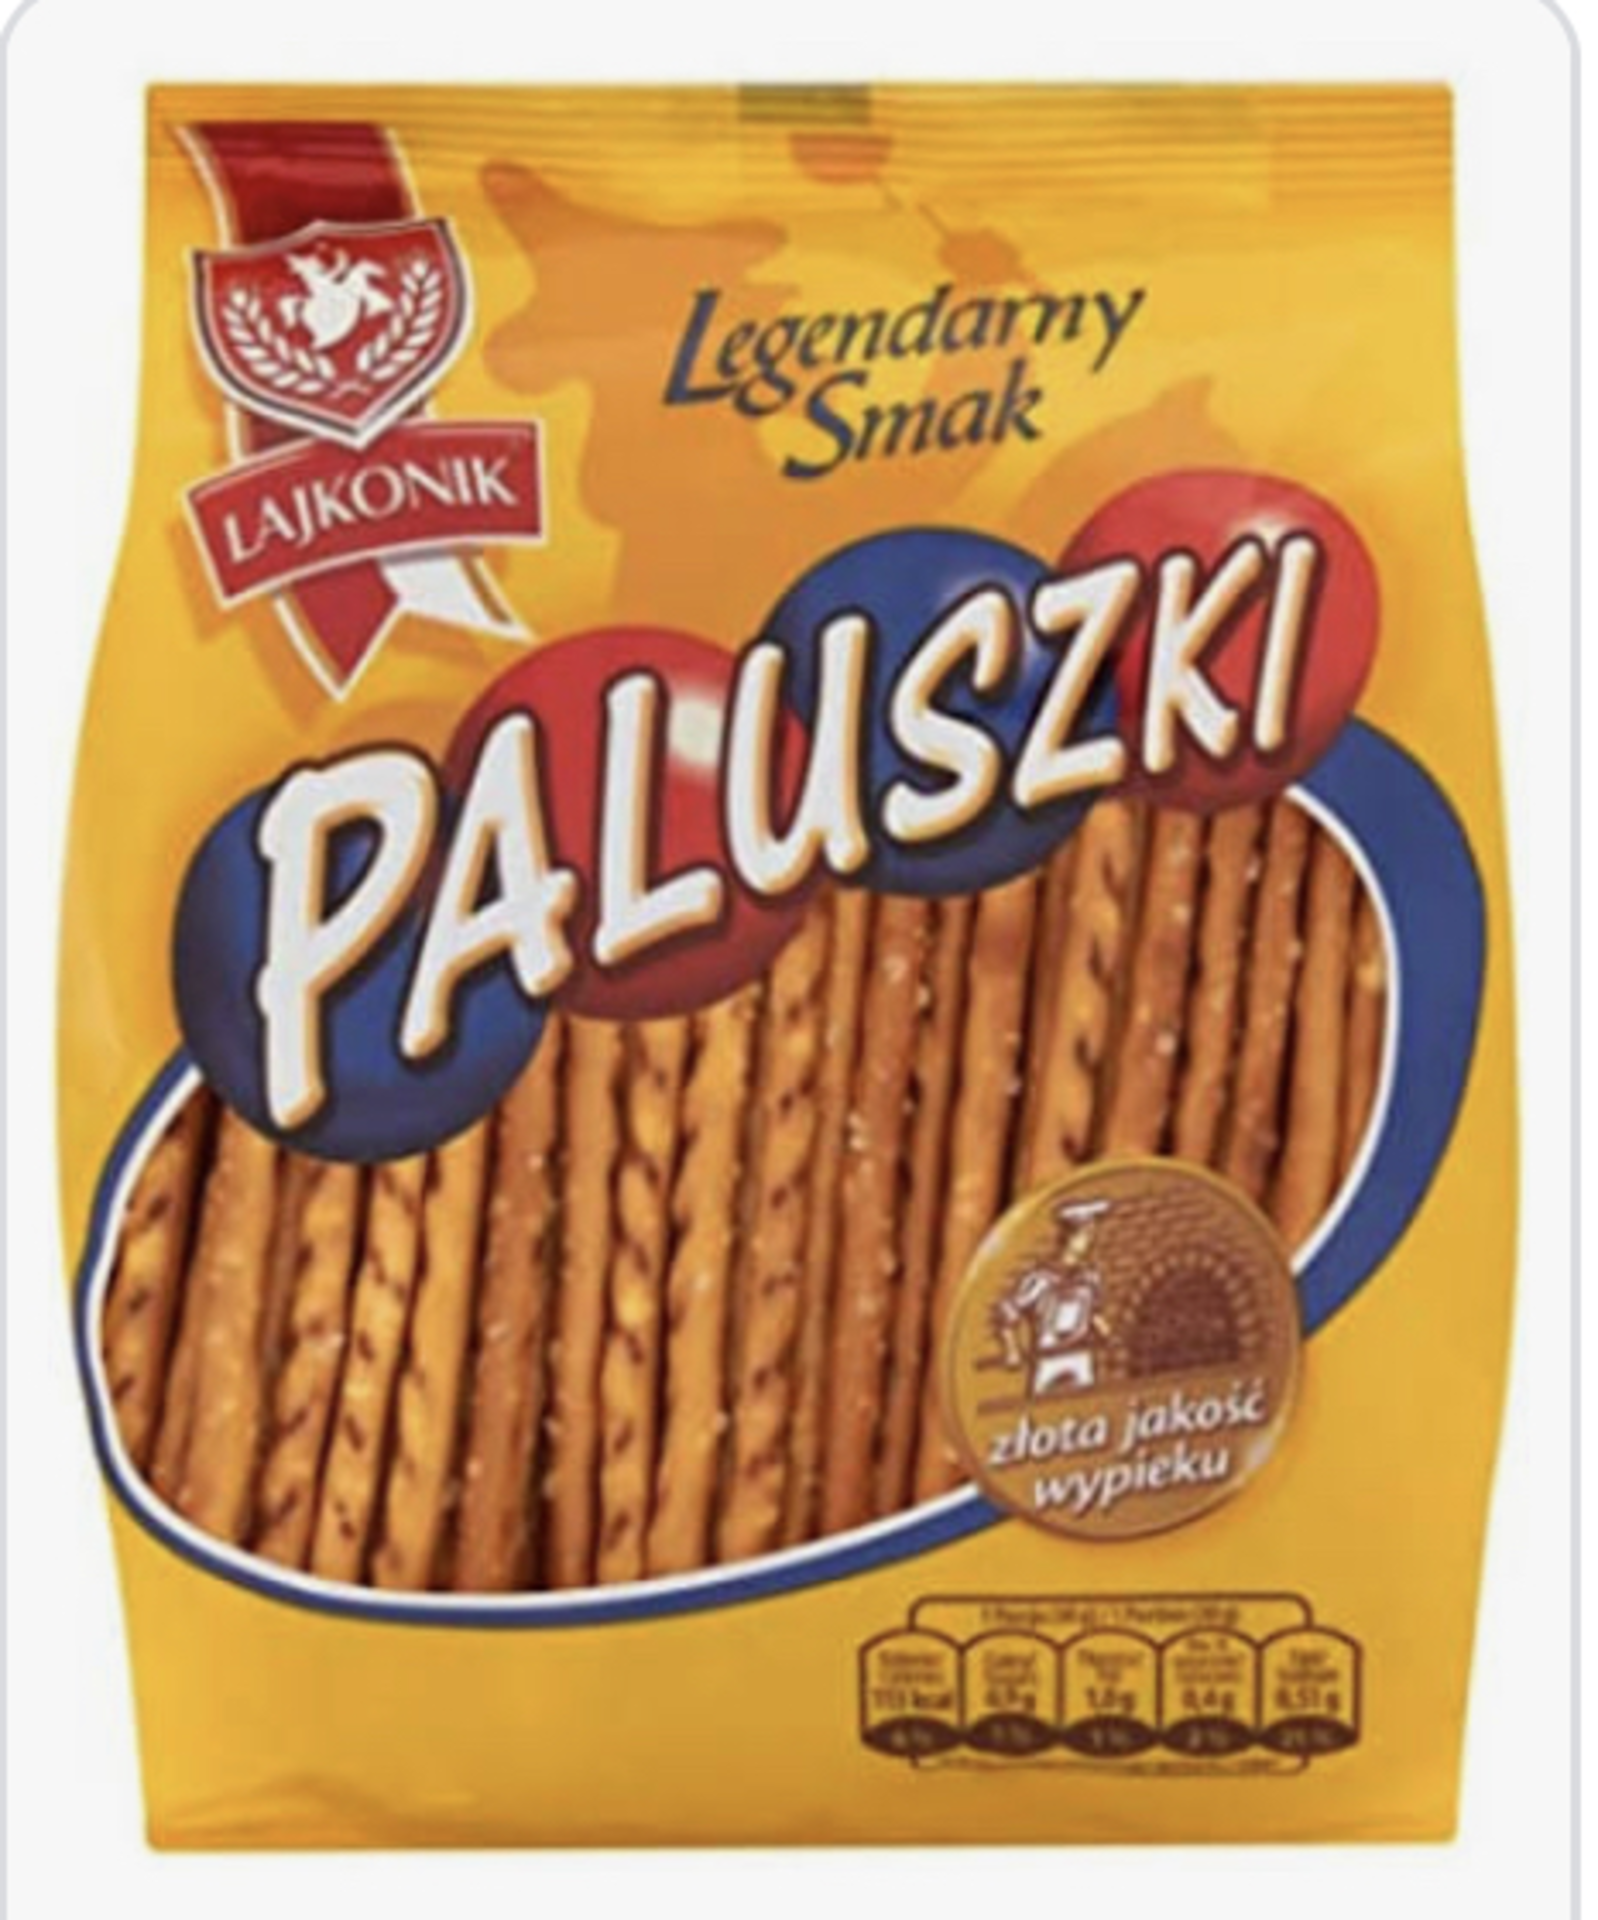 RRP £628 (Appx. Count 40) spW42x5950i Lajkonik - Paluszki Salty Sticks 200g (Pack of 12) - Salted